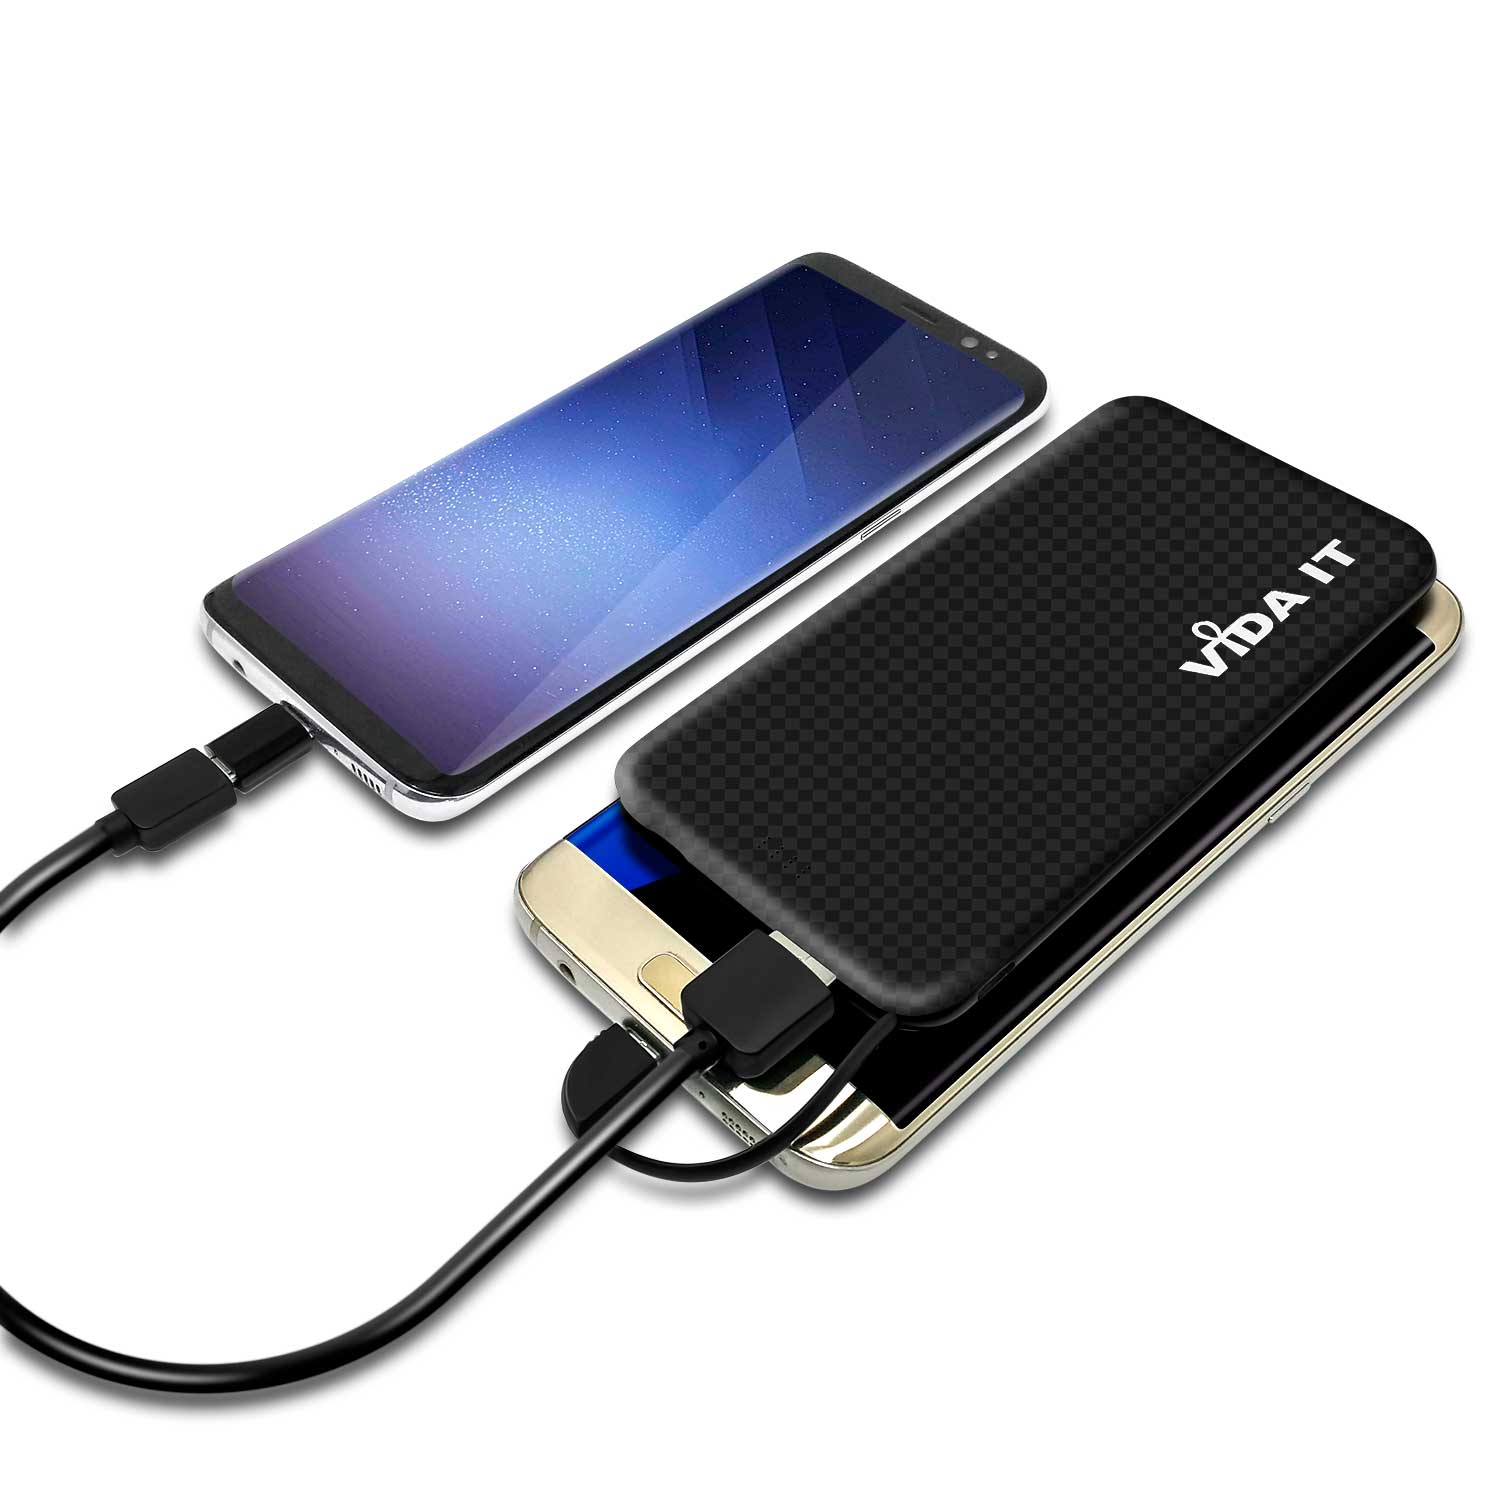 V502 Slim 9mm Dual Port 5000mAh Power Bank Portable External Emergency Battery Pack USB Charger with Built-in Micro USB cable plus Apple-Lightning and USB-C Adapters in Black Colour